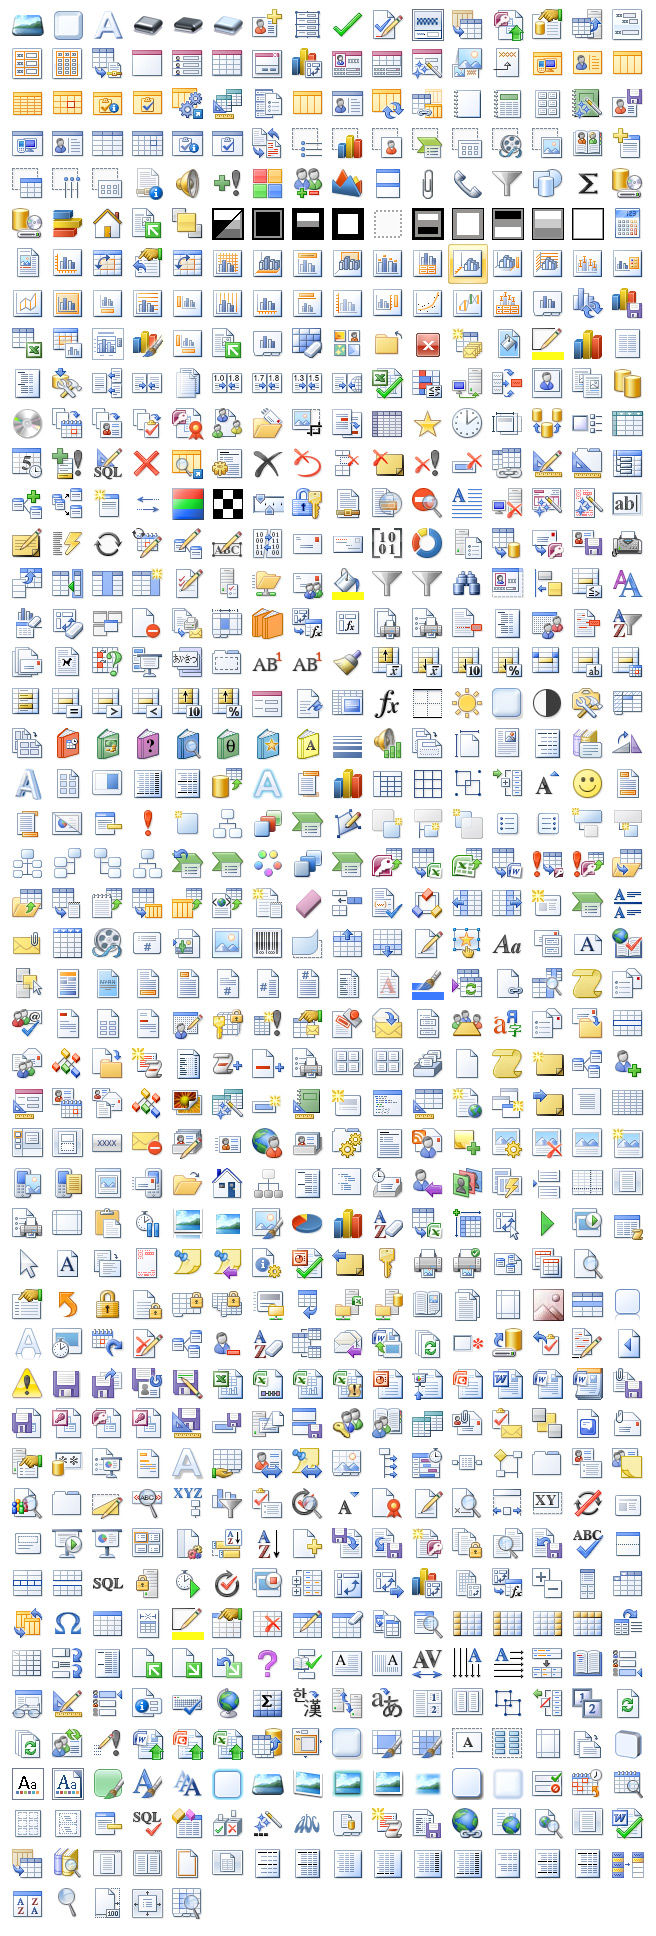 All 756 icons in Office 2007 | istartedsomething